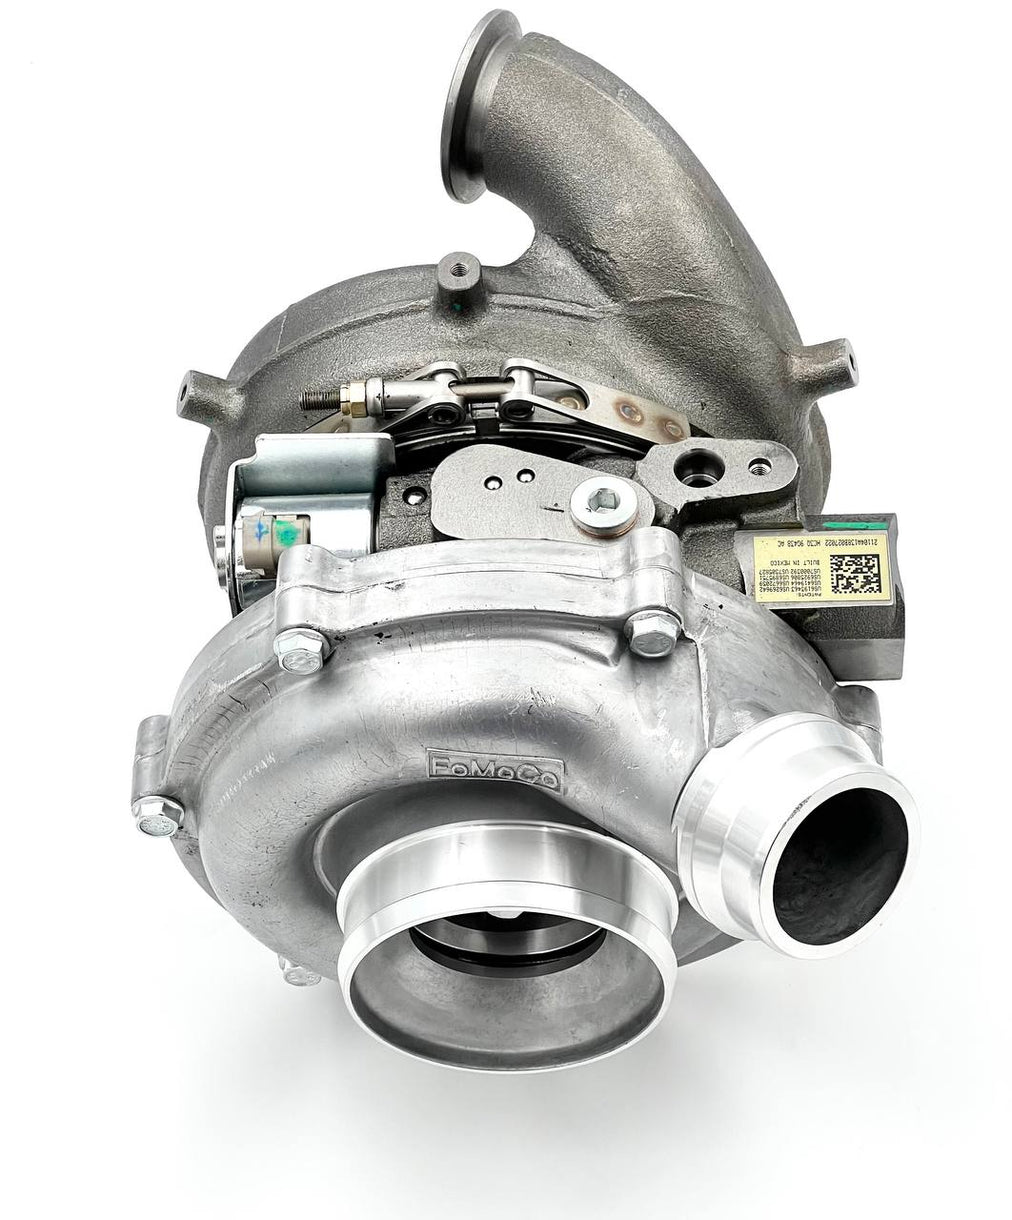 FC3Z6K682A | Genuine Ford® Turbocharger For 6.7L Ford F250 / F350SD